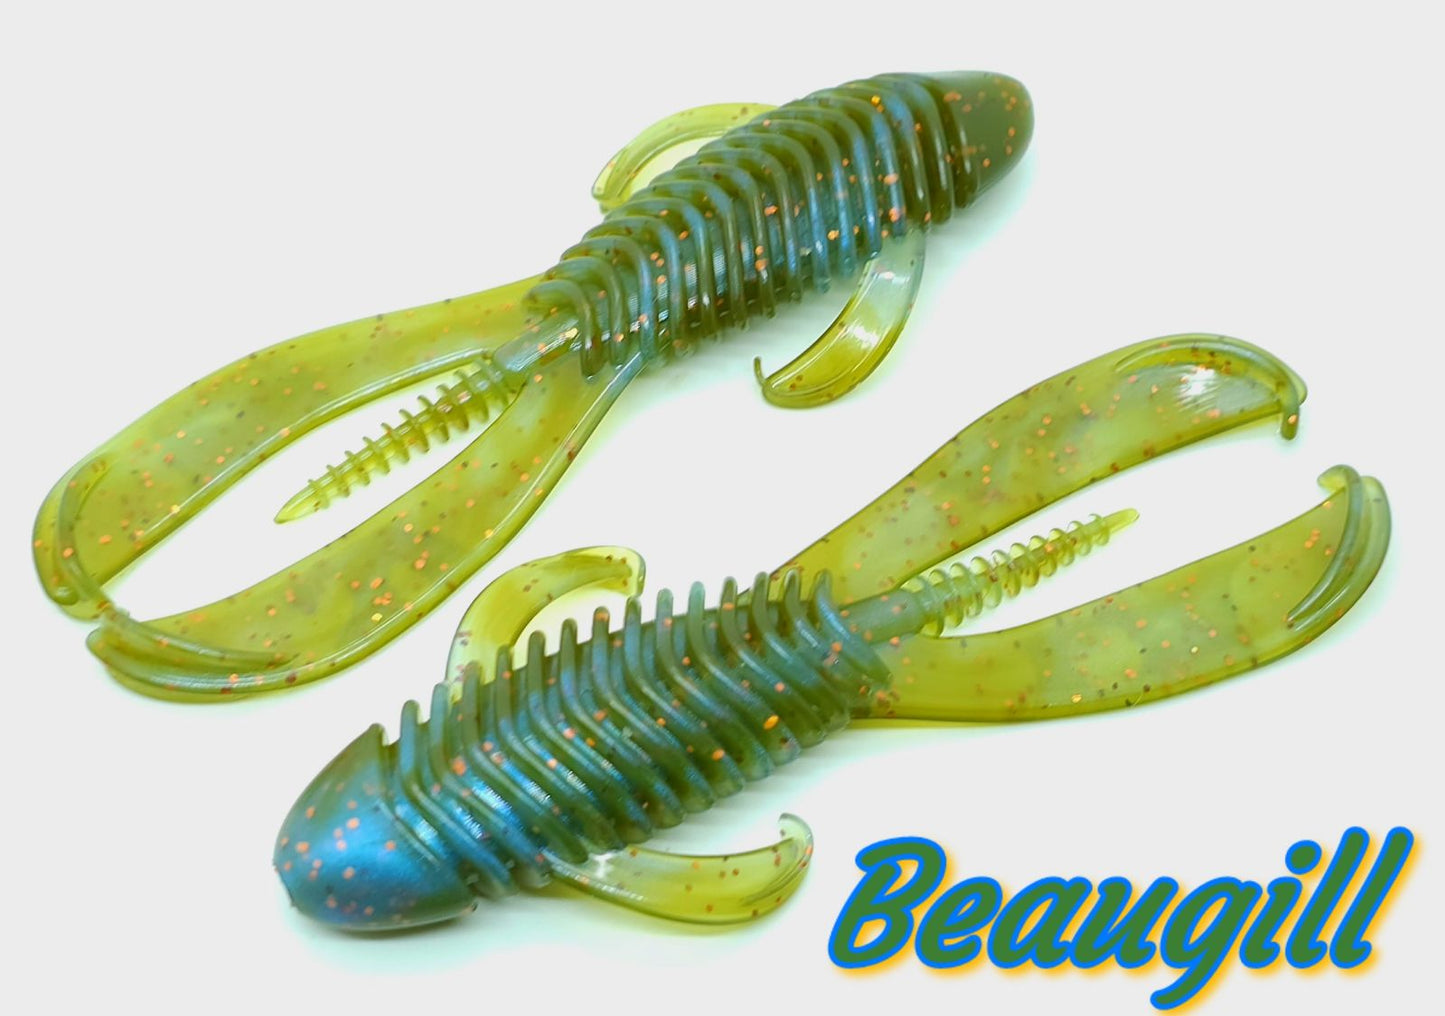 CR-2 Creature Beaugill 8 pack